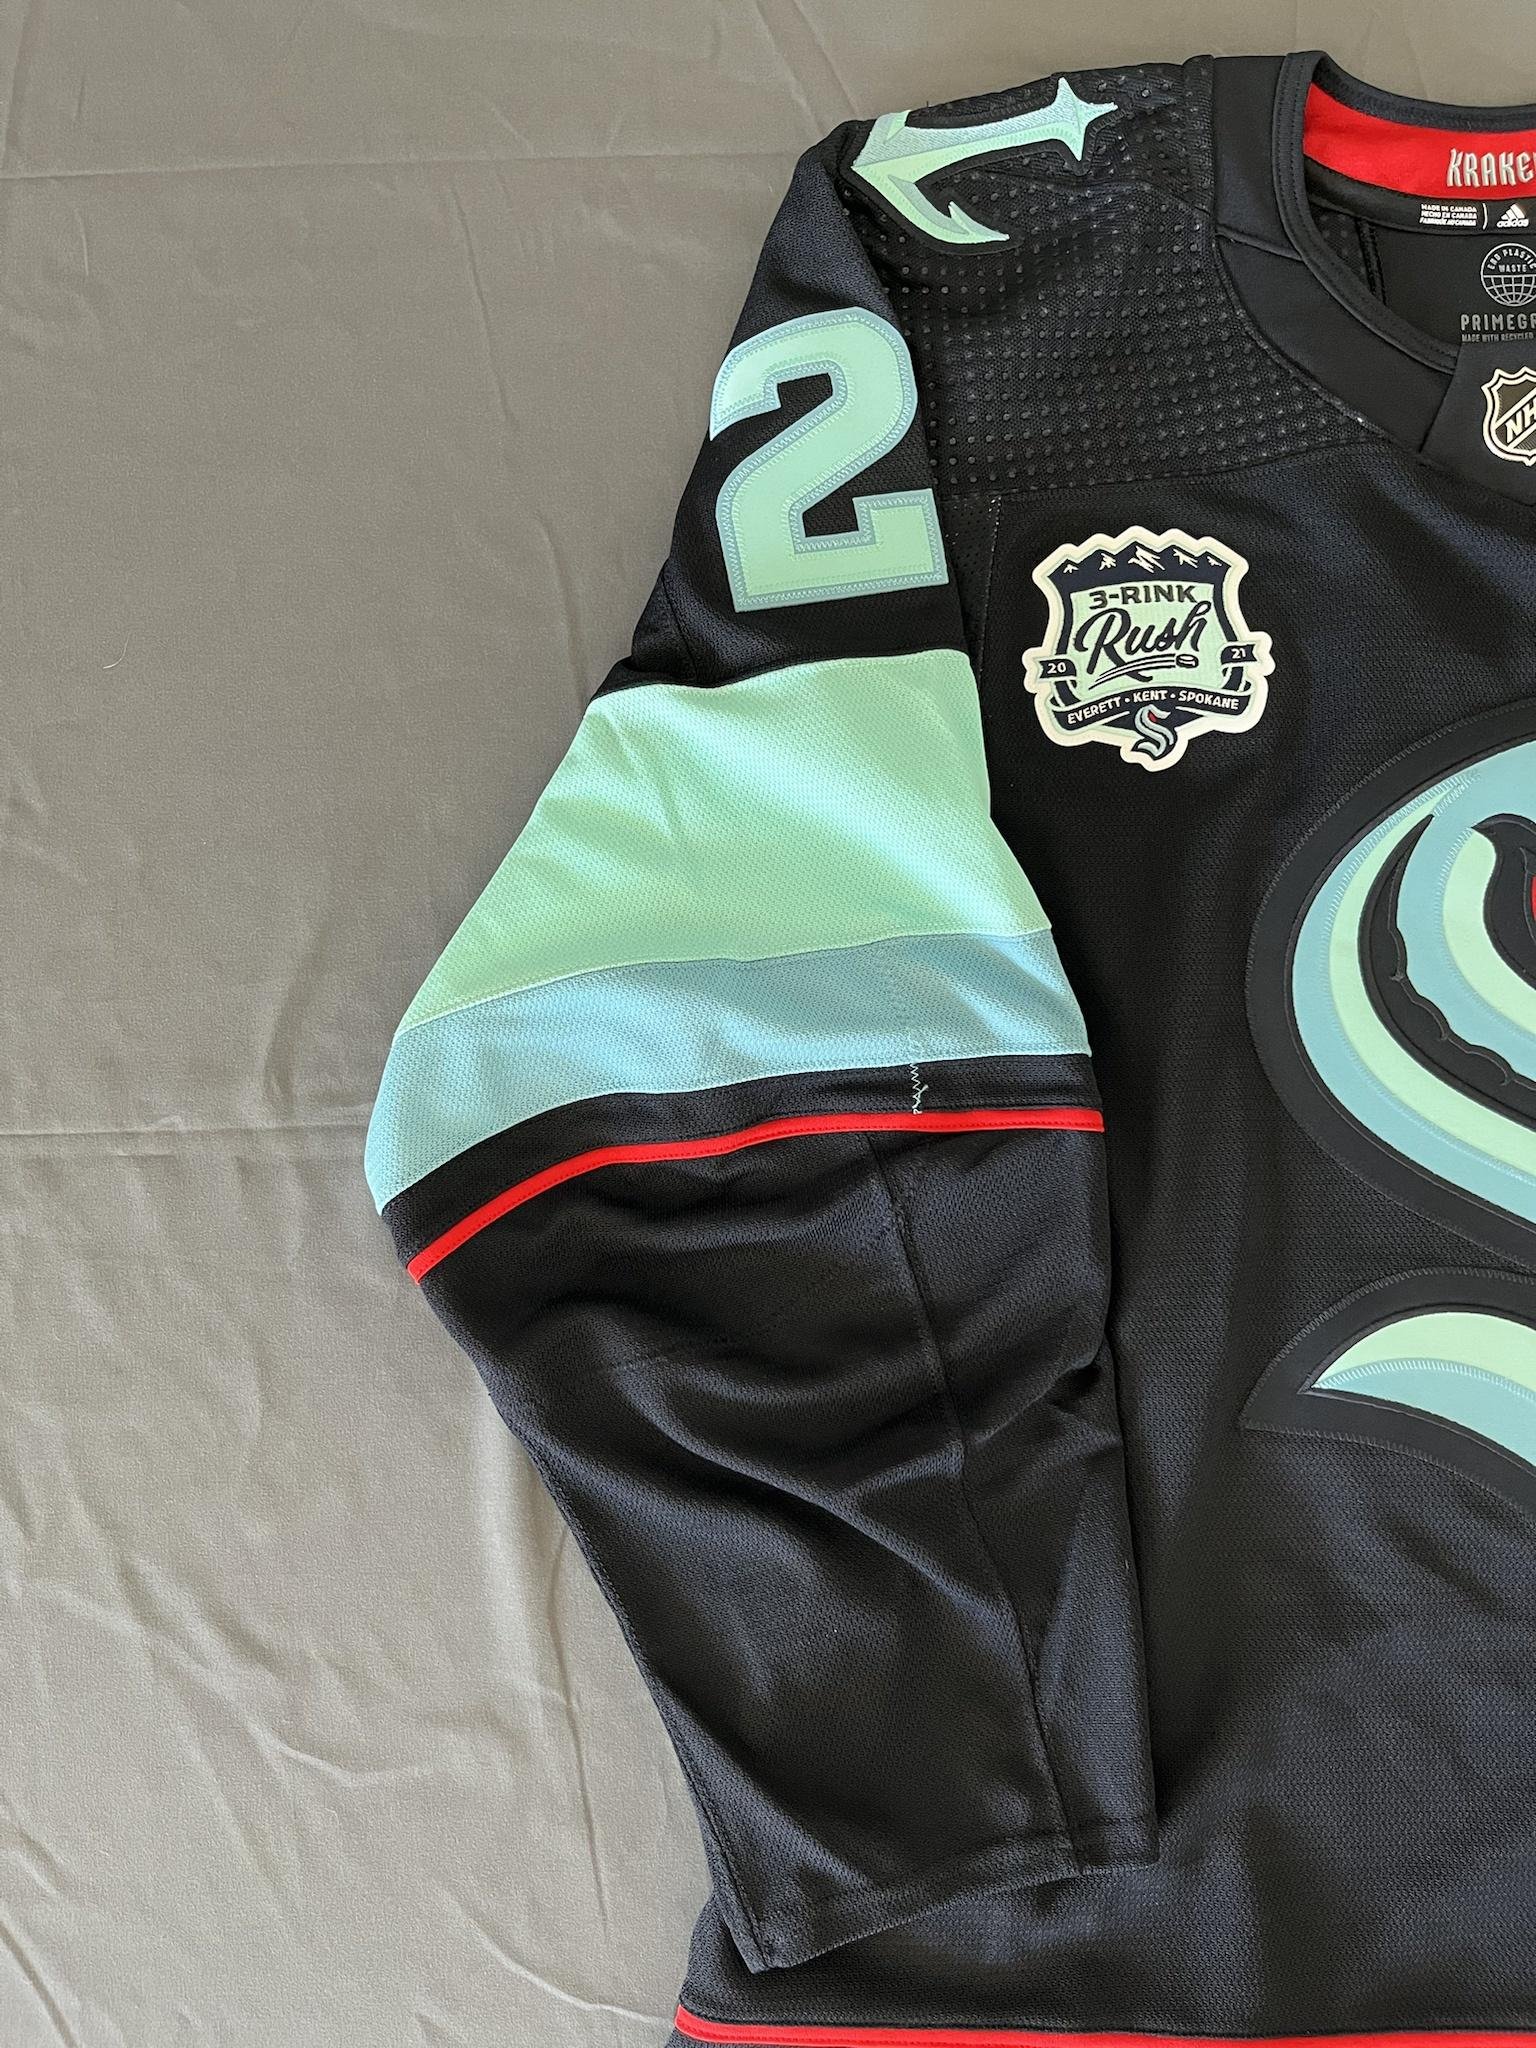 Seattle Kraken Green Night warm up jerseys auction table (game vs Colorado  Avalanche 4/20/22) 